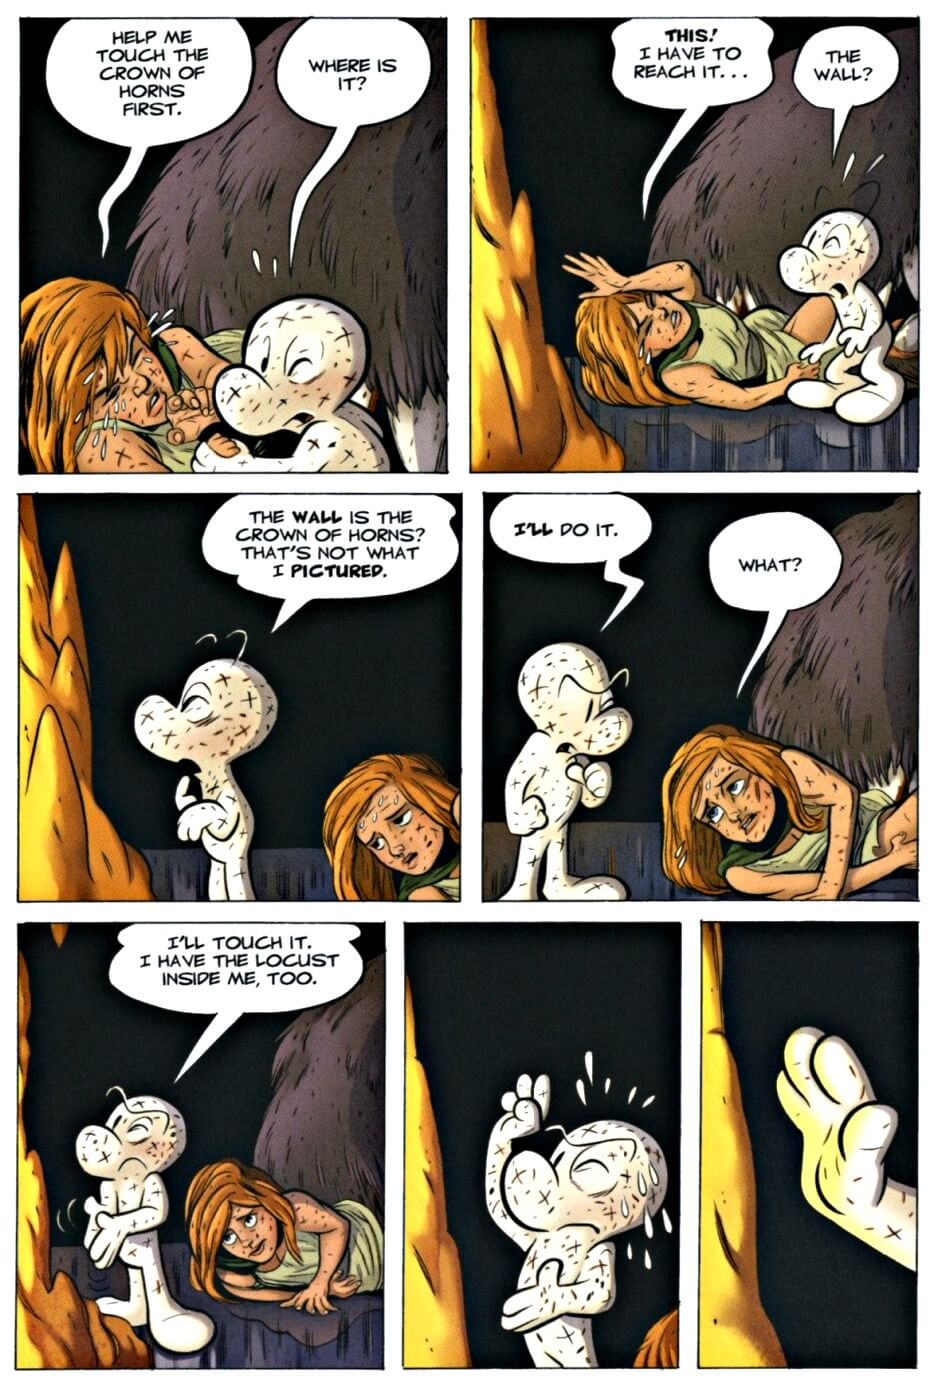 page 147 chapter 5 of bone 9 crown of horns graphic novel